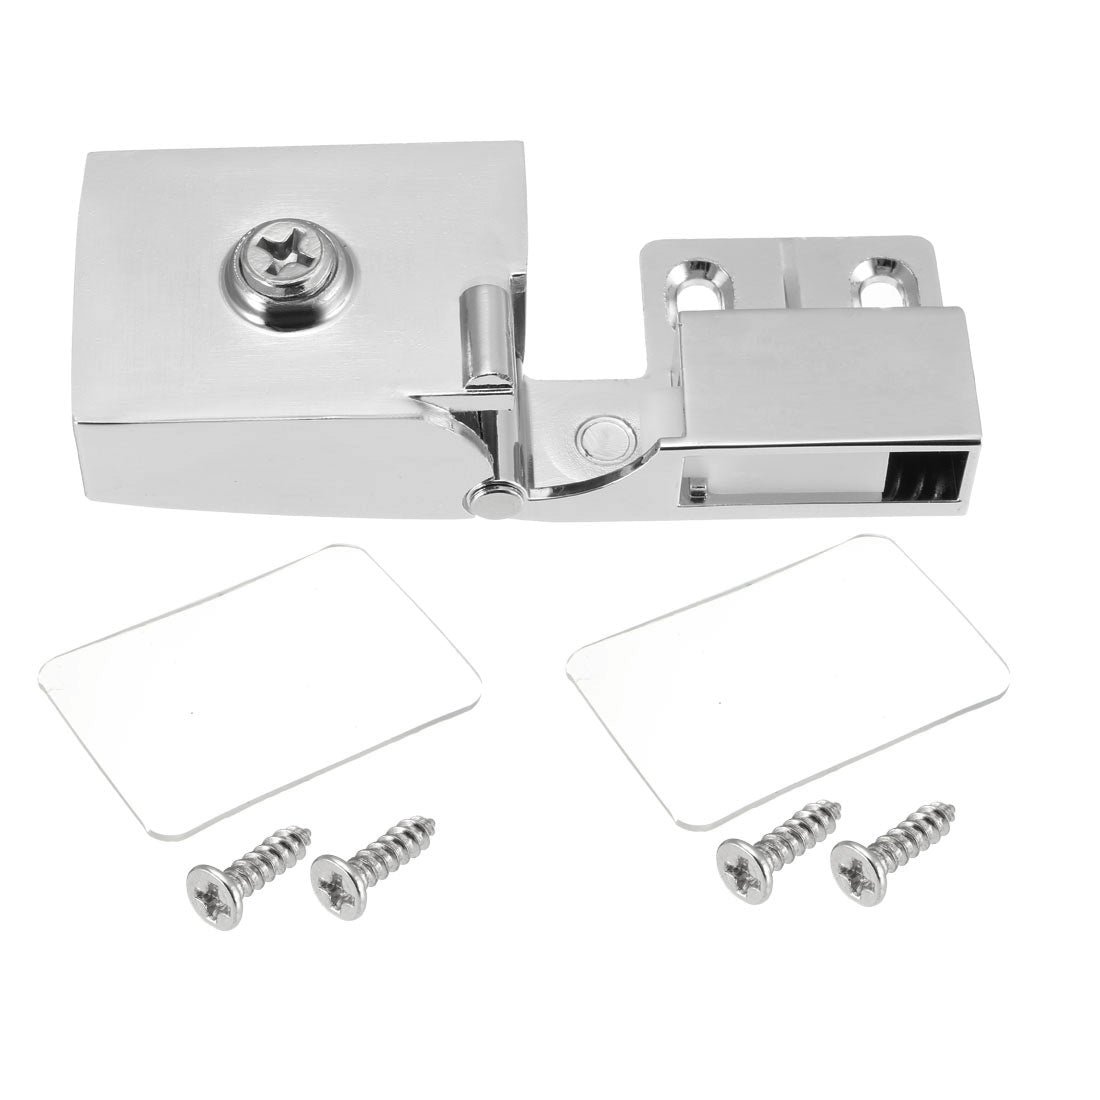 uxcell Uxcell 3-5mm Thickness Wall Mounted Glass Door Hinges Clamps Silver Tone 1 Pair